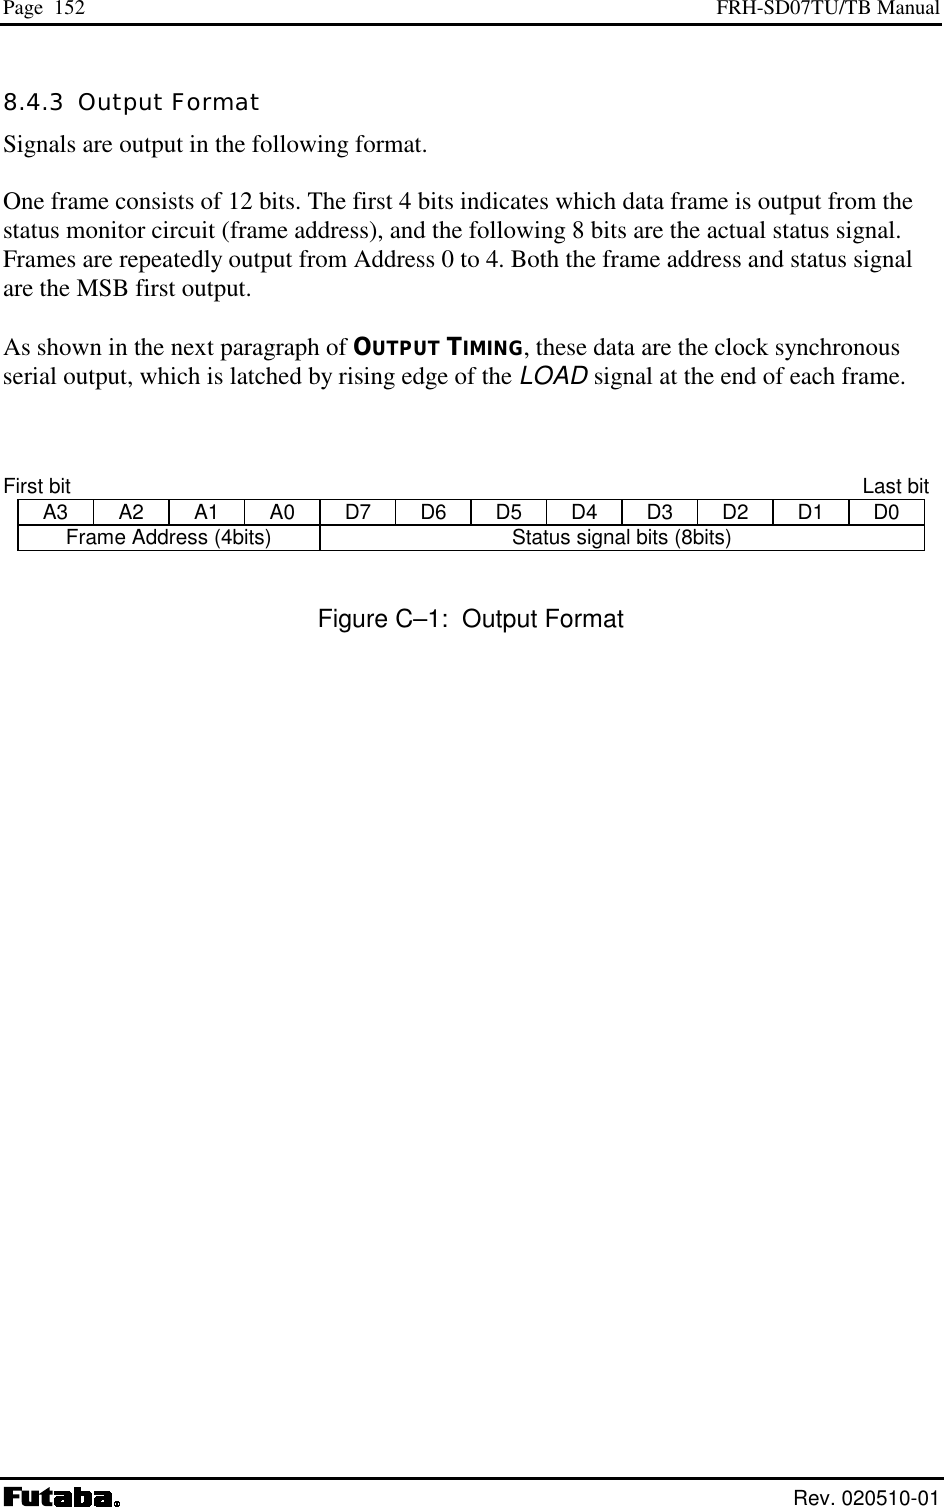 Page  152  FRH-SD07TU/TB Manual  Rev. 020510-01 8.4.3  Output Format Signals are output in the following format.   One frame consists of 12 bits. The first 4 bits indicates which data frame is output from the status monitor circuit (frame address), and the following 8 bits are the actual status signal. Frames are repeatedly output from Address 0 to 4. Both the frame address and status signal are the MSB first output.  As shown in the next paragraph of OUTPUT TIMING, these data are the clock synchronous serial output, which is latched by rising edge of the LOAD signal at the end of each frame.    First bit                 Last bit A3 A2 A1 A0 D7 D6 D5 D4 D3 D2 D1 D0 Frame Address (4bits)  Status signal bits (8bits)  Figure C–1:  Output Format 